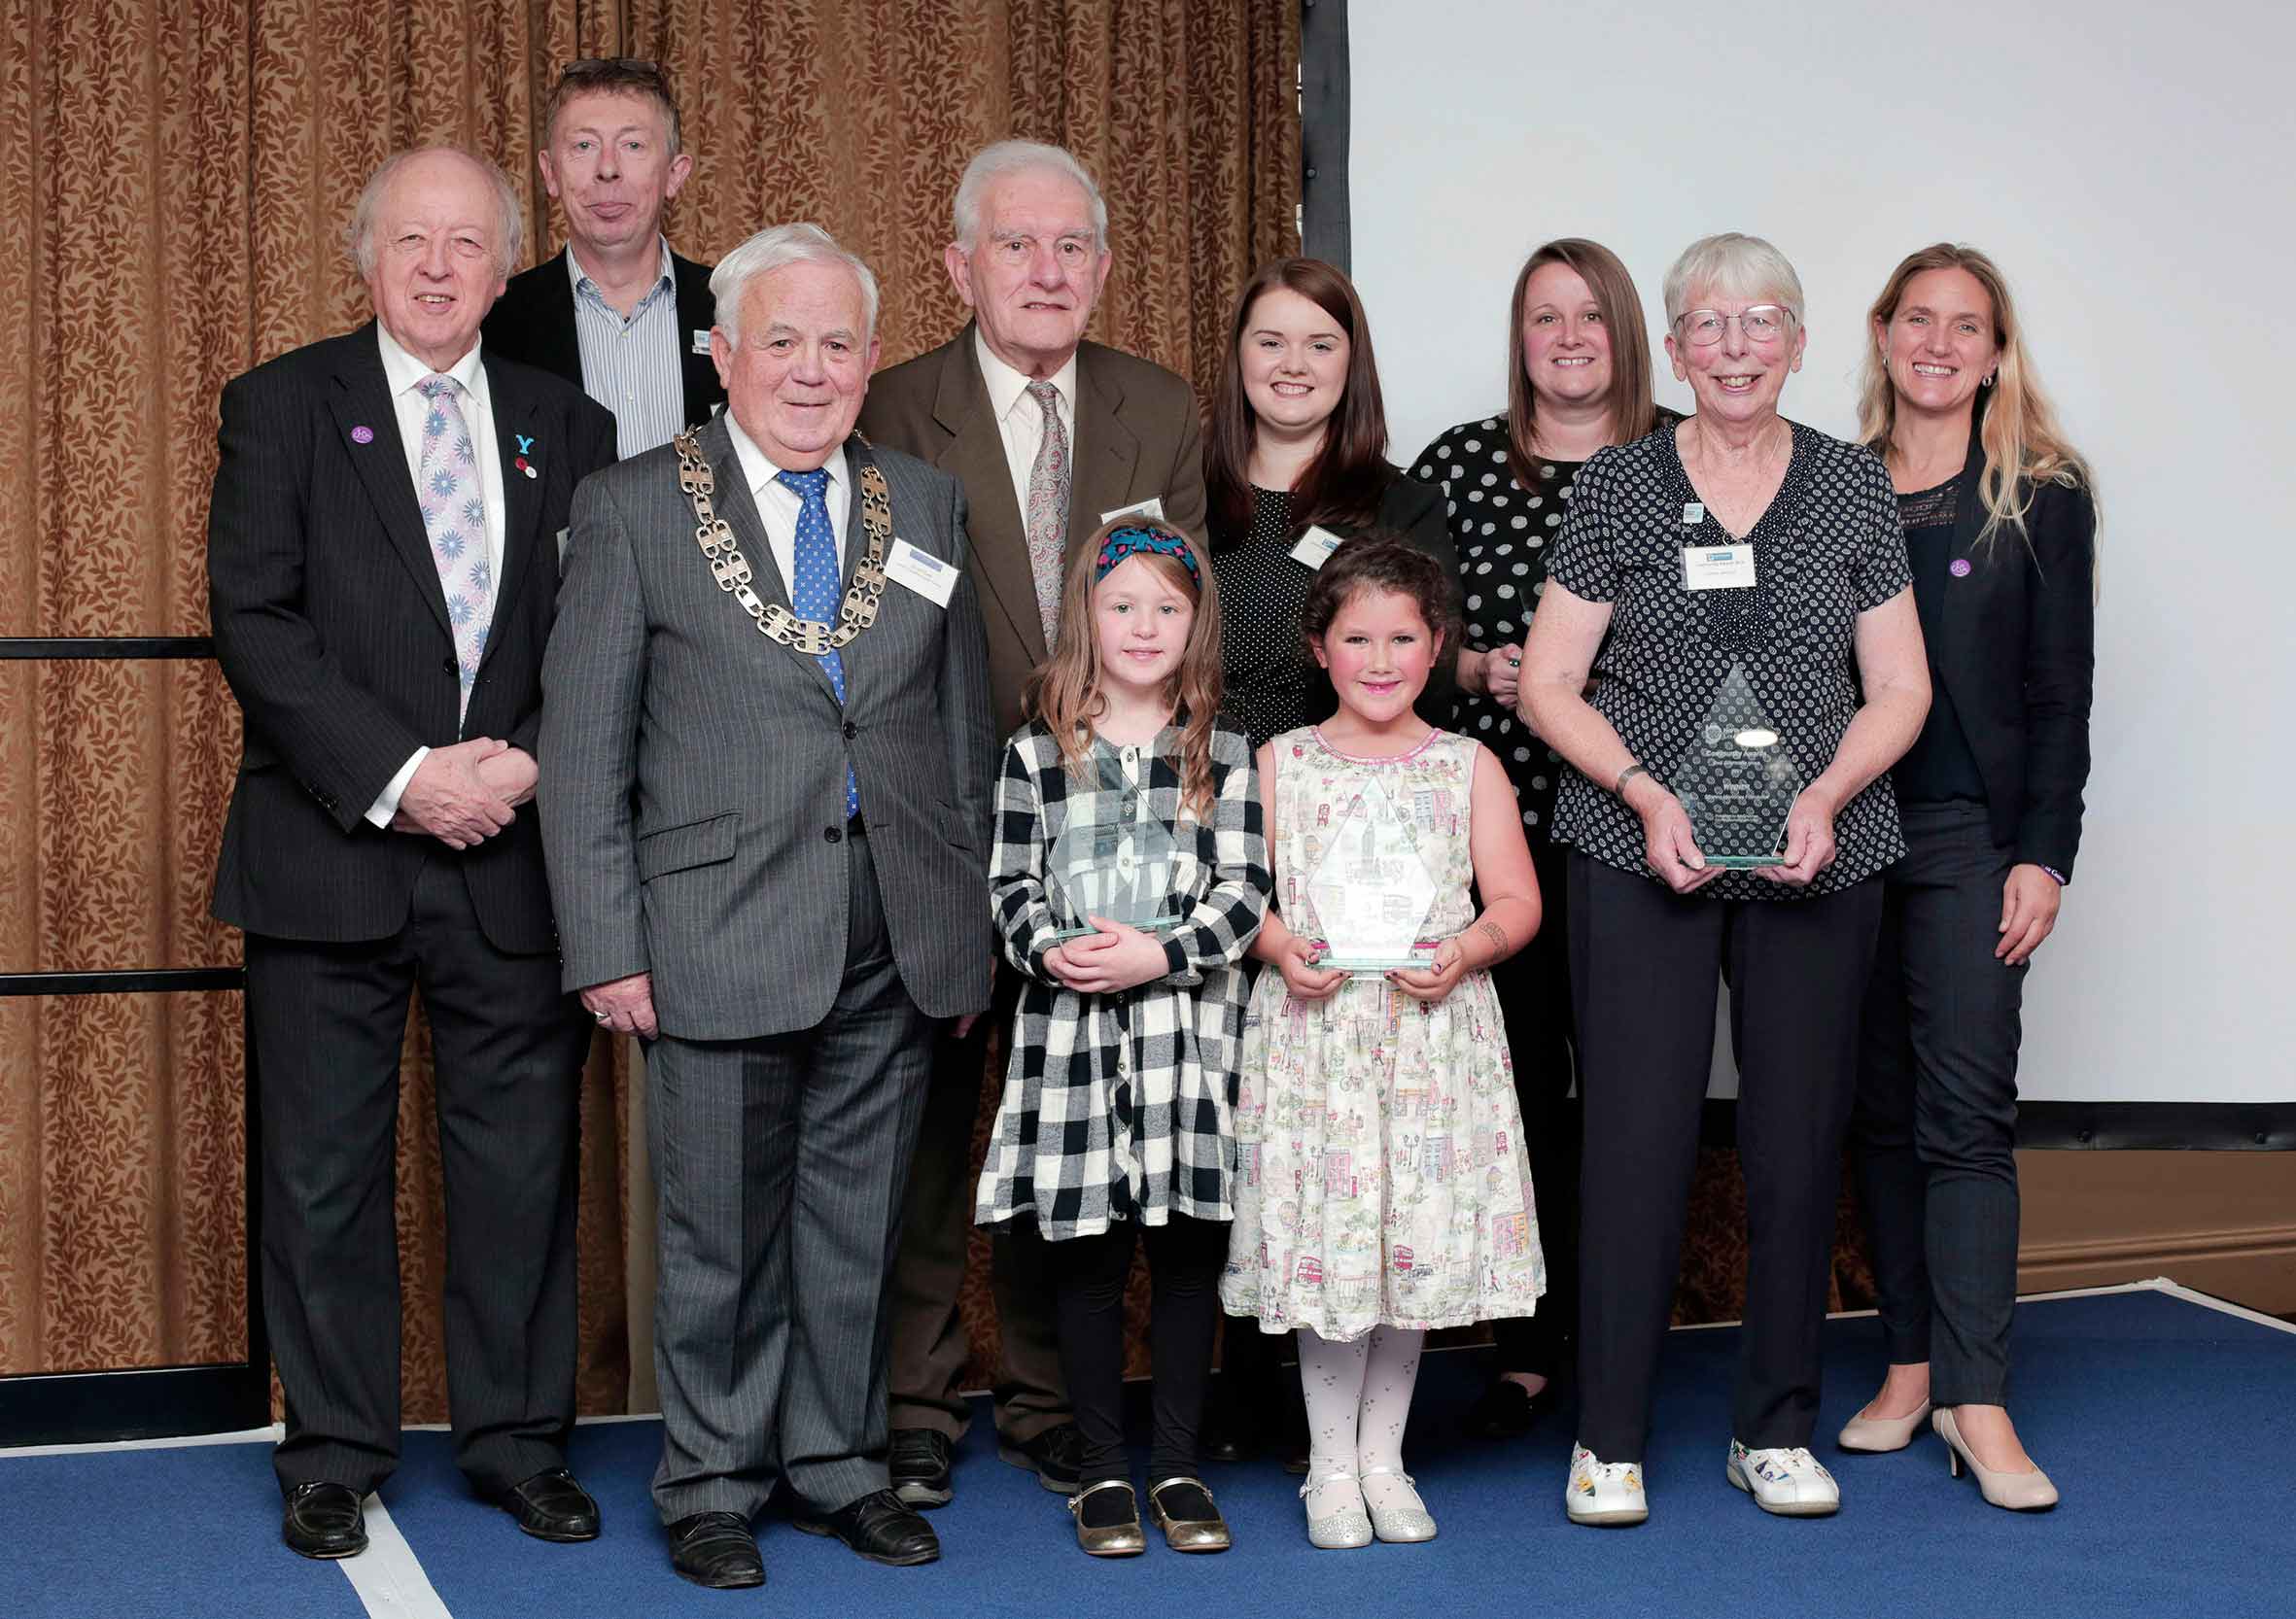 All the winners with (left) County Council Leader Cllr Carl Les and County Council Chair Cllr Jim Clark and (right) Kim Leadbeater.